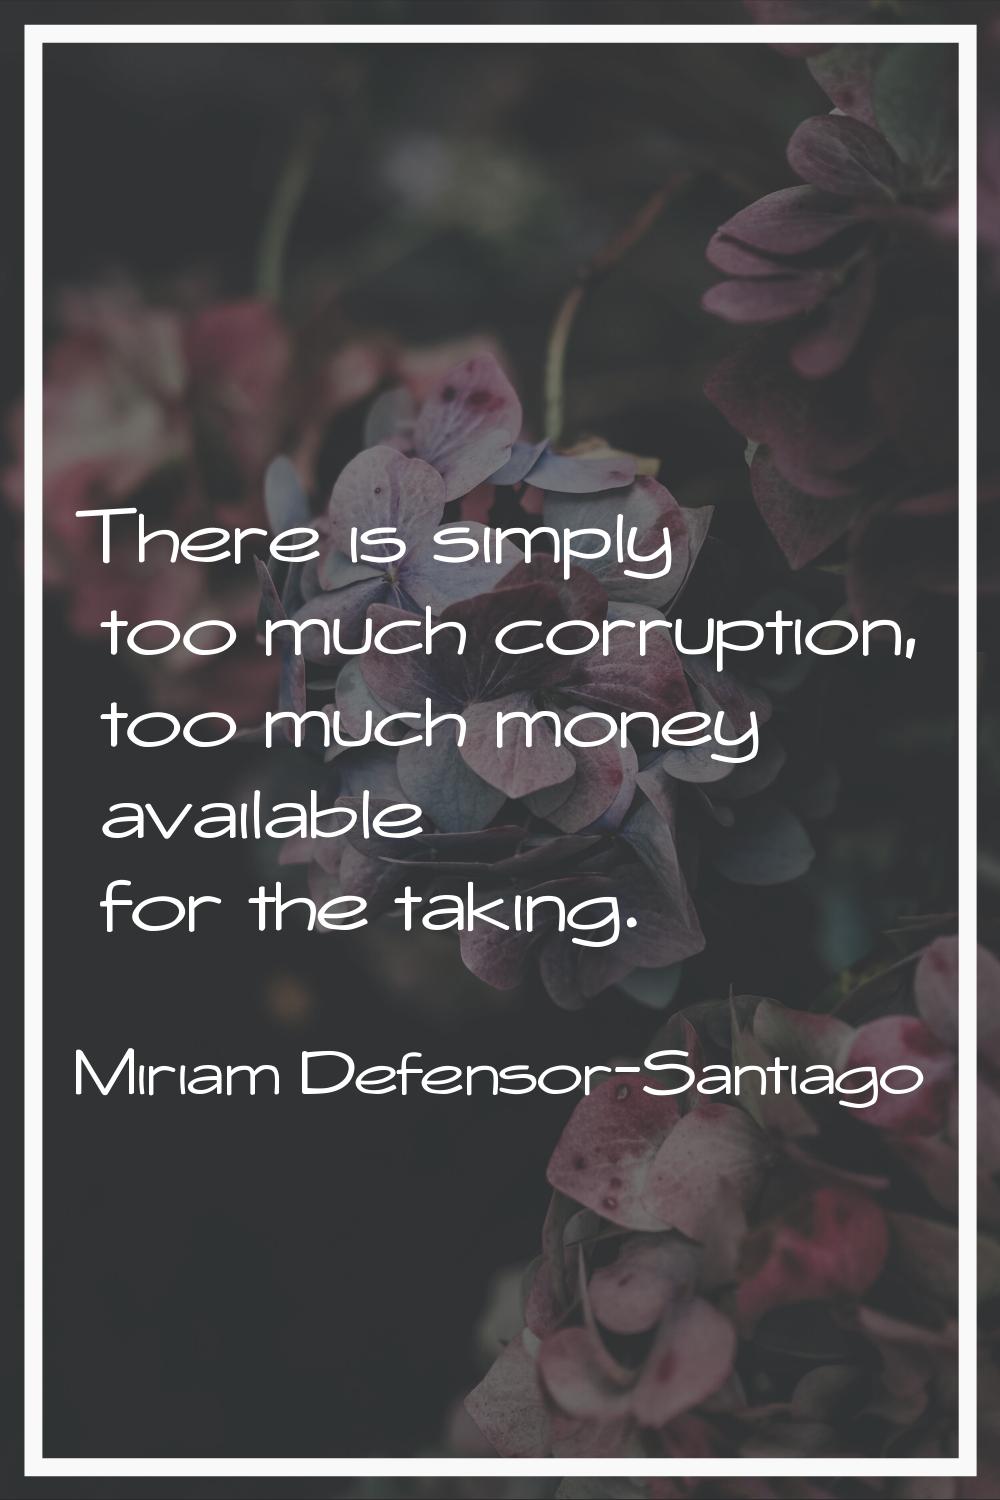 There is simply too much corruption, too much money available for the taking.